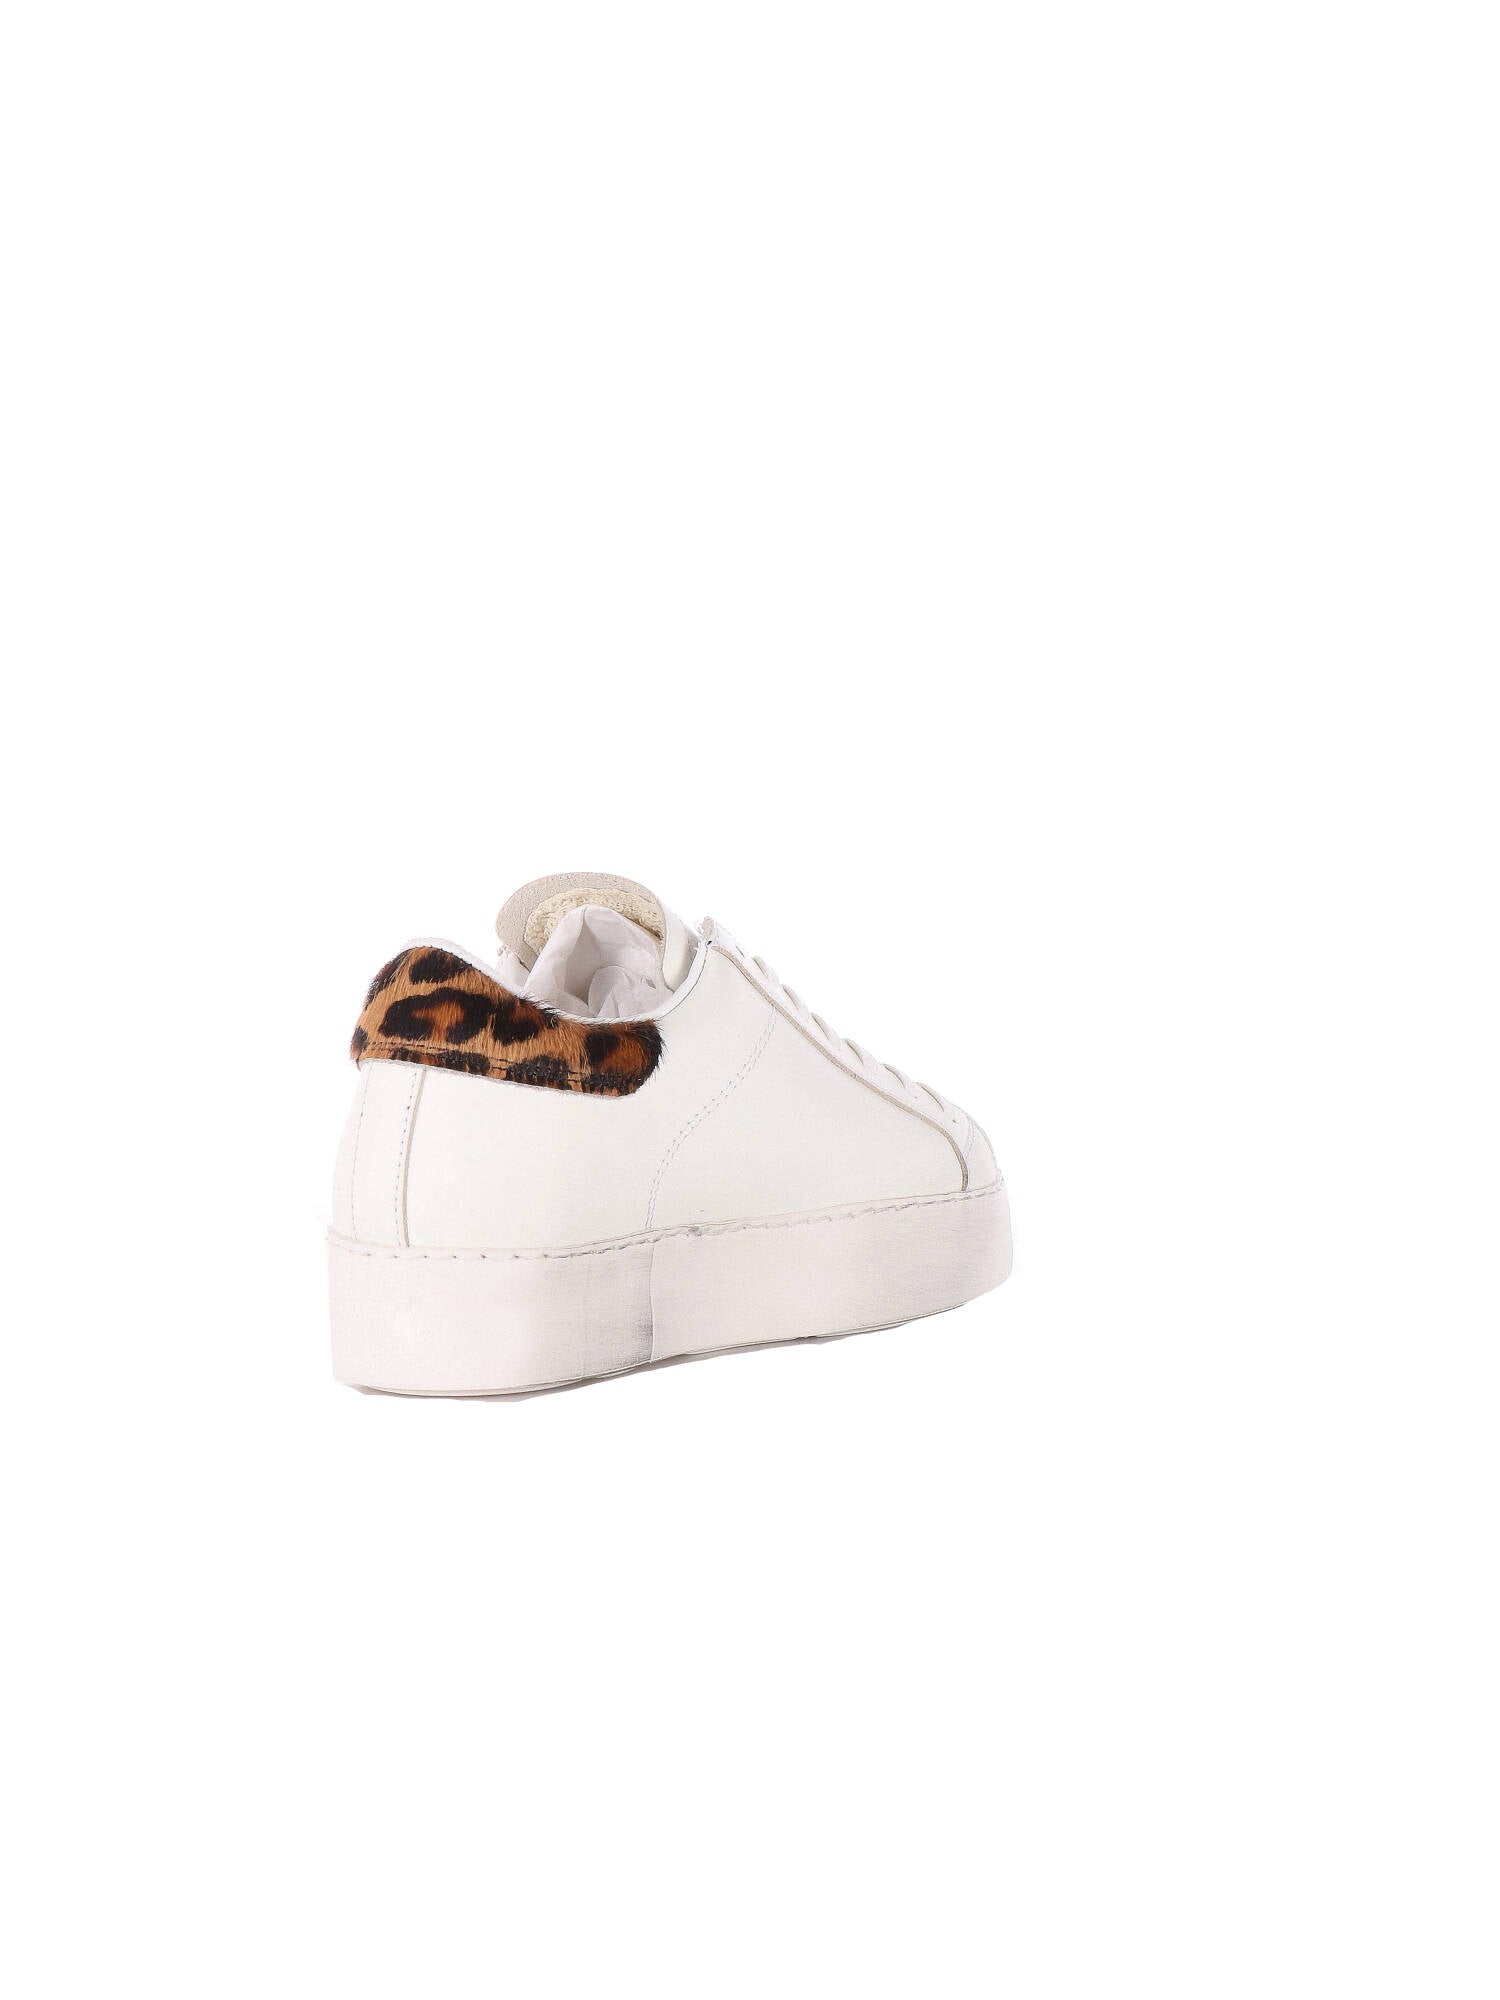 Ama-brand donna sneakers bianco/animalier SNK 2502